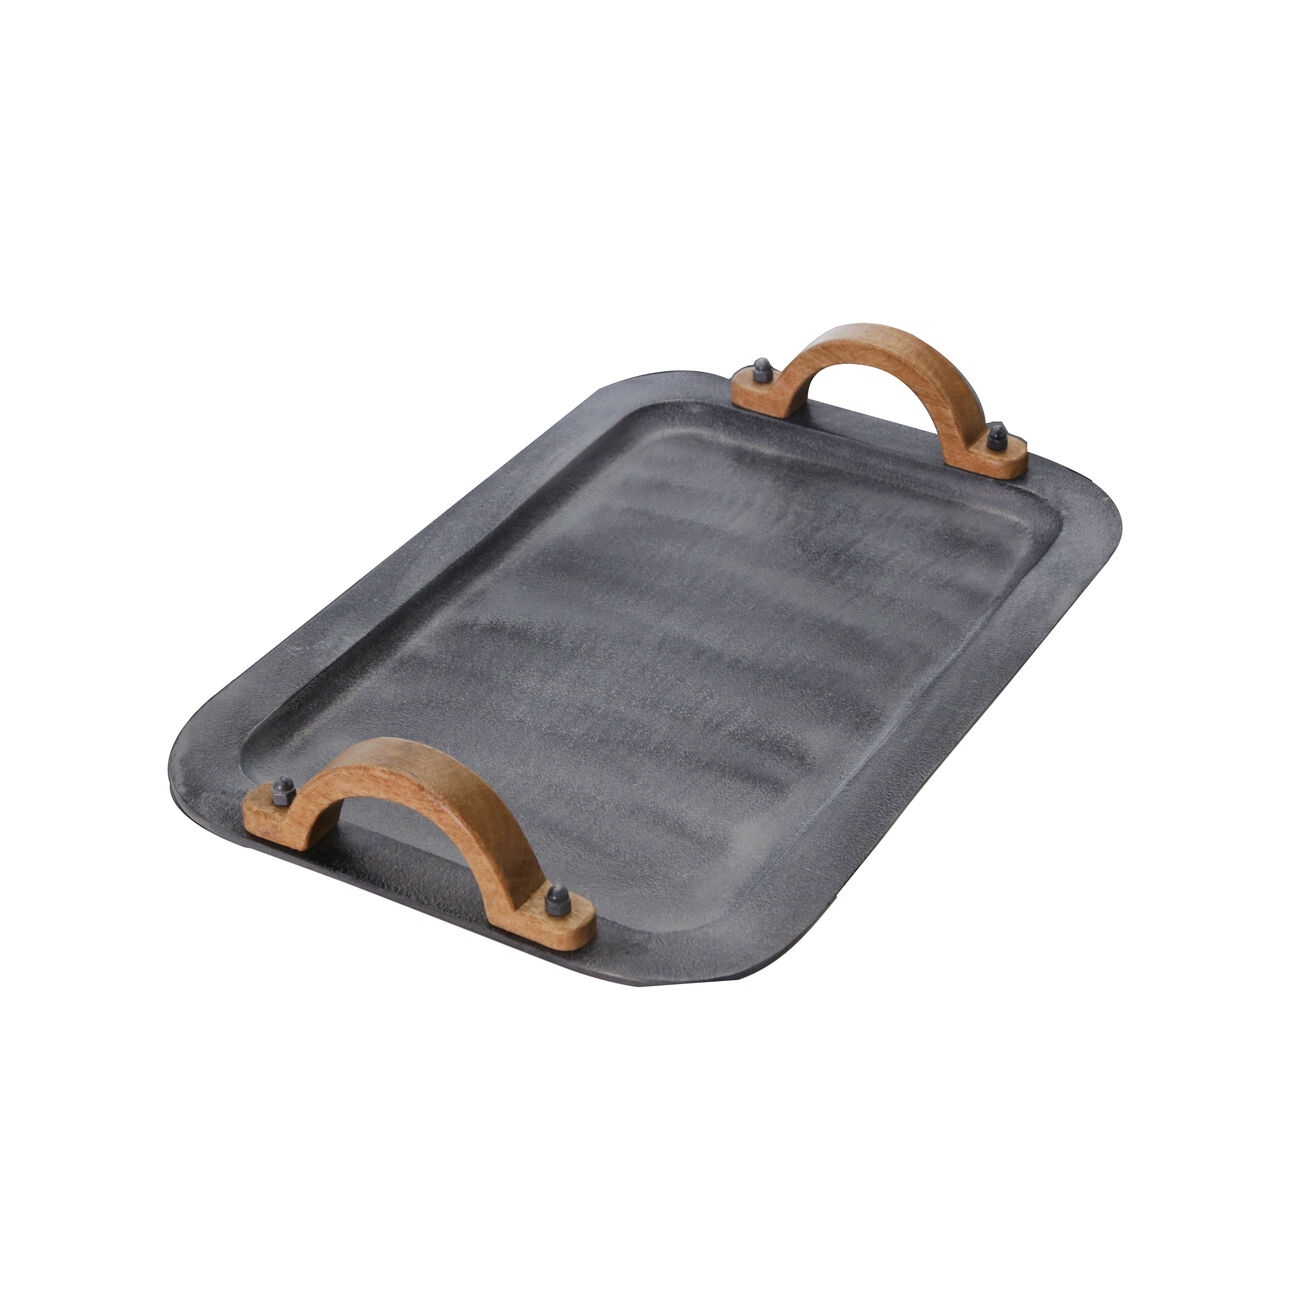 Transitional Metal Tray with Wooden Handle, Set of 2, Gray and Brown